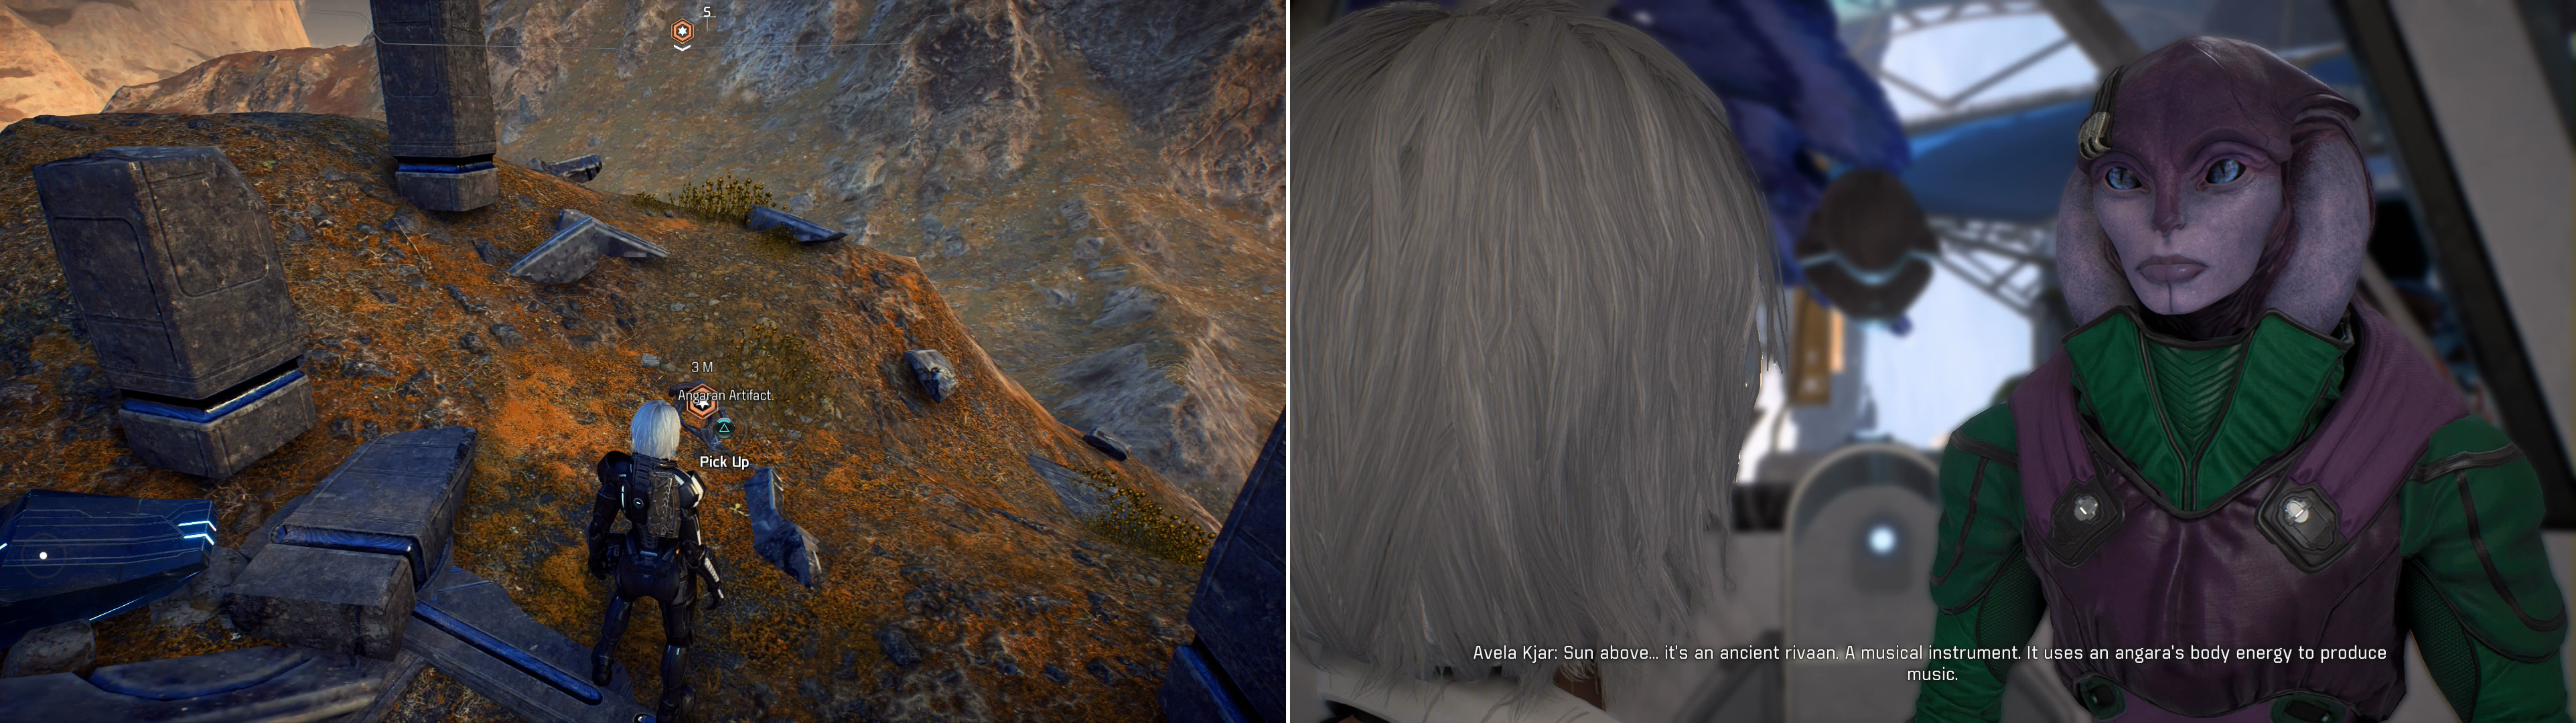 Scale a hill to reach a ruined Angaran shrine, where another artifact awaits (left). With this prize in hand, return to Avela Kjar on Aya (right).